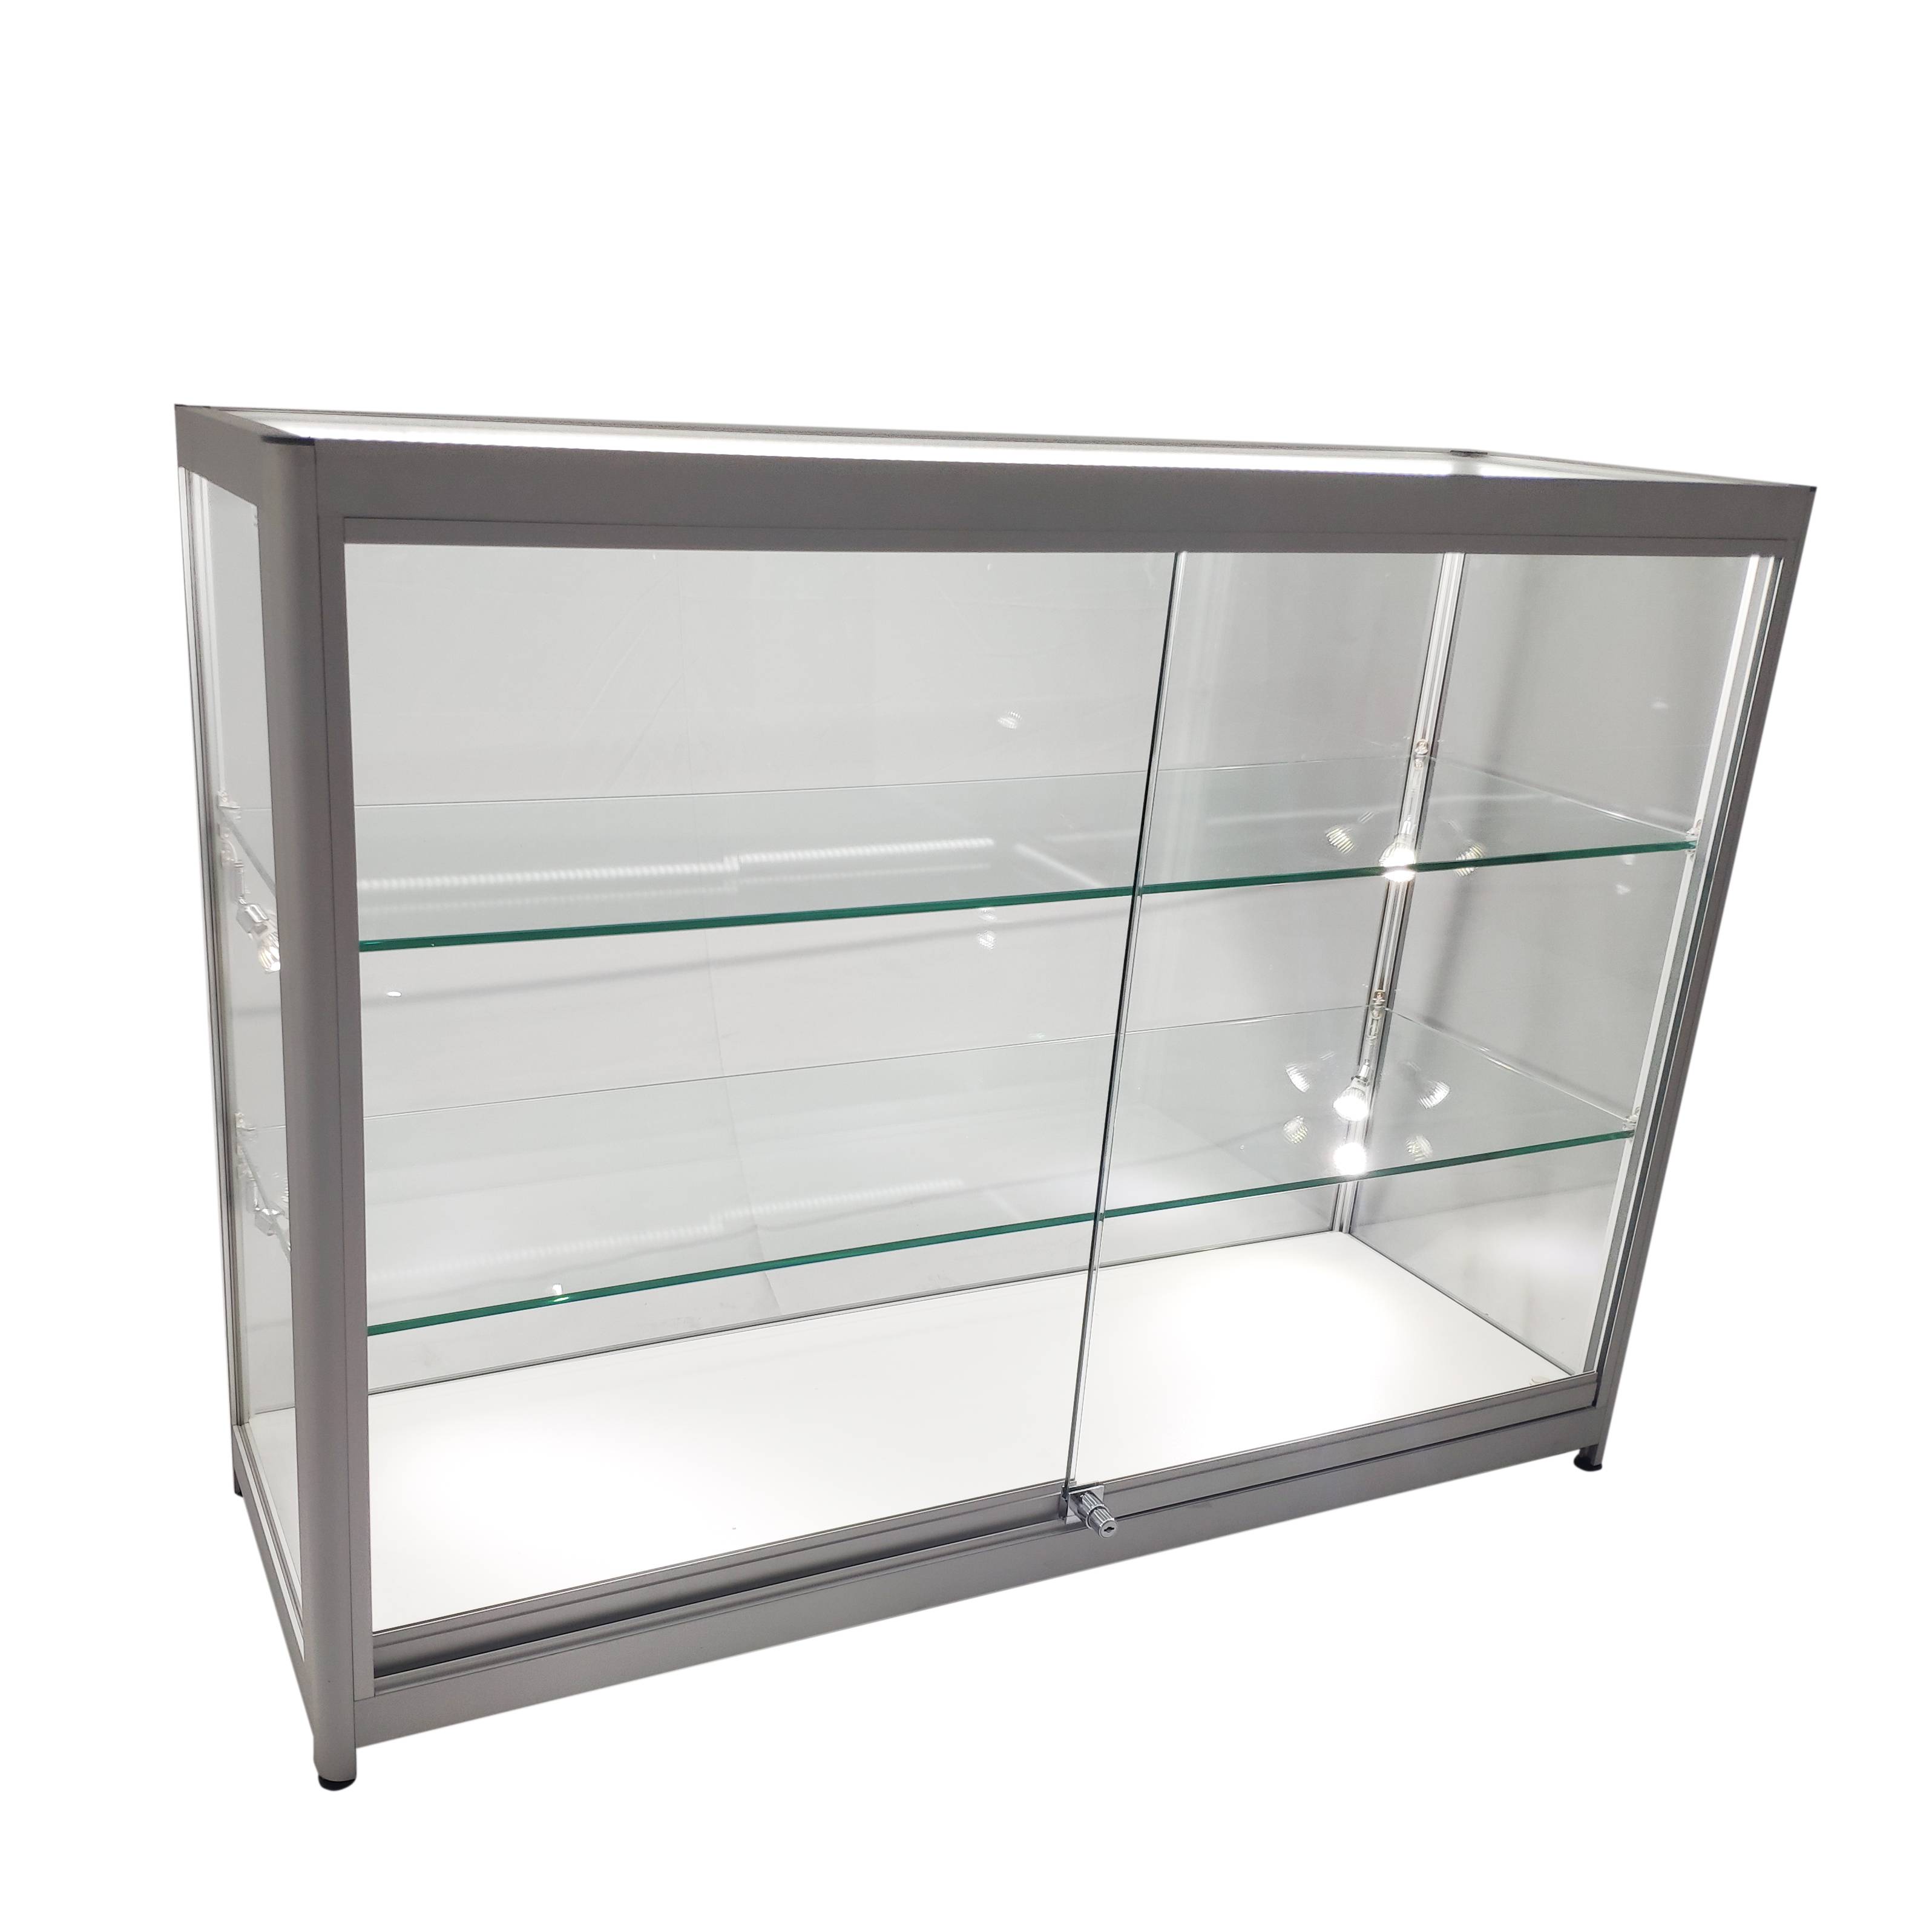 https://www.oyeshowcases.com/retail-glass-display-case-with-4-led-lights-oye-product/